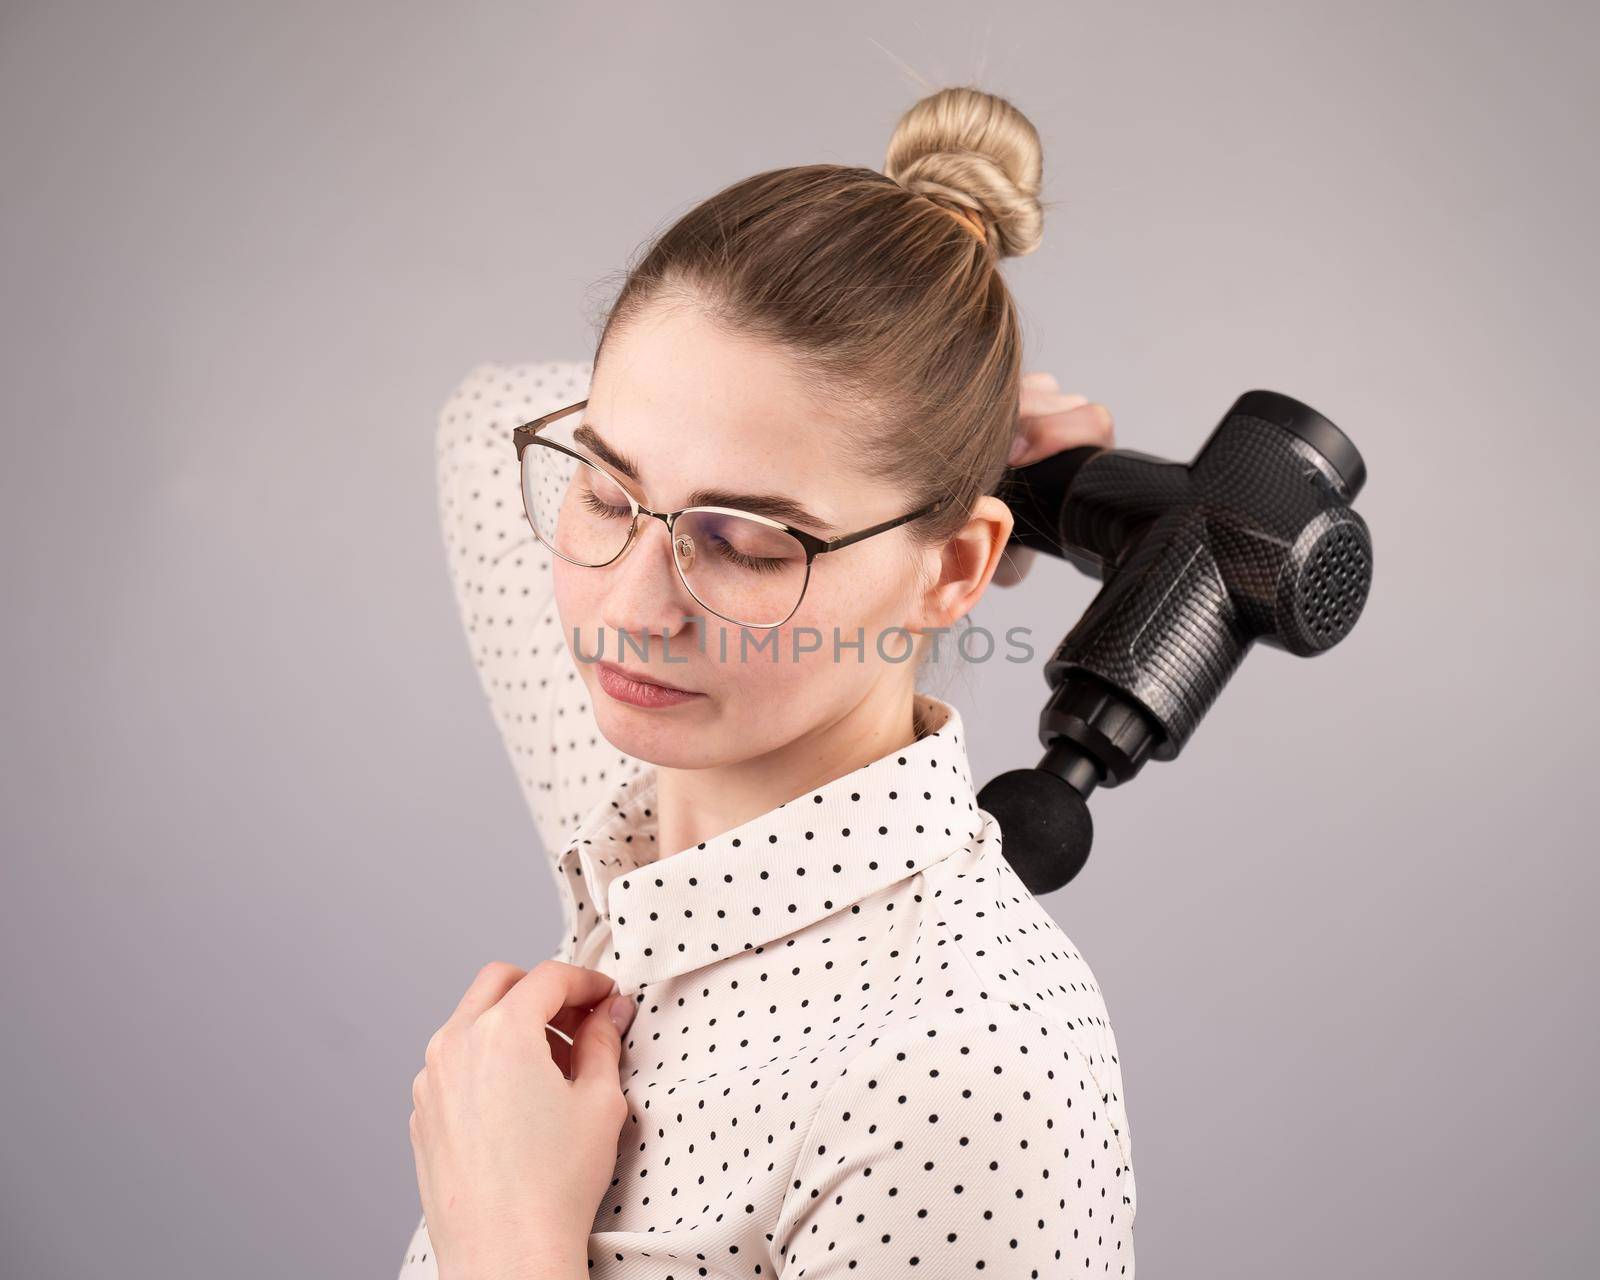 Caucasian business lady makes herself a back massage with a massager gun on a white background